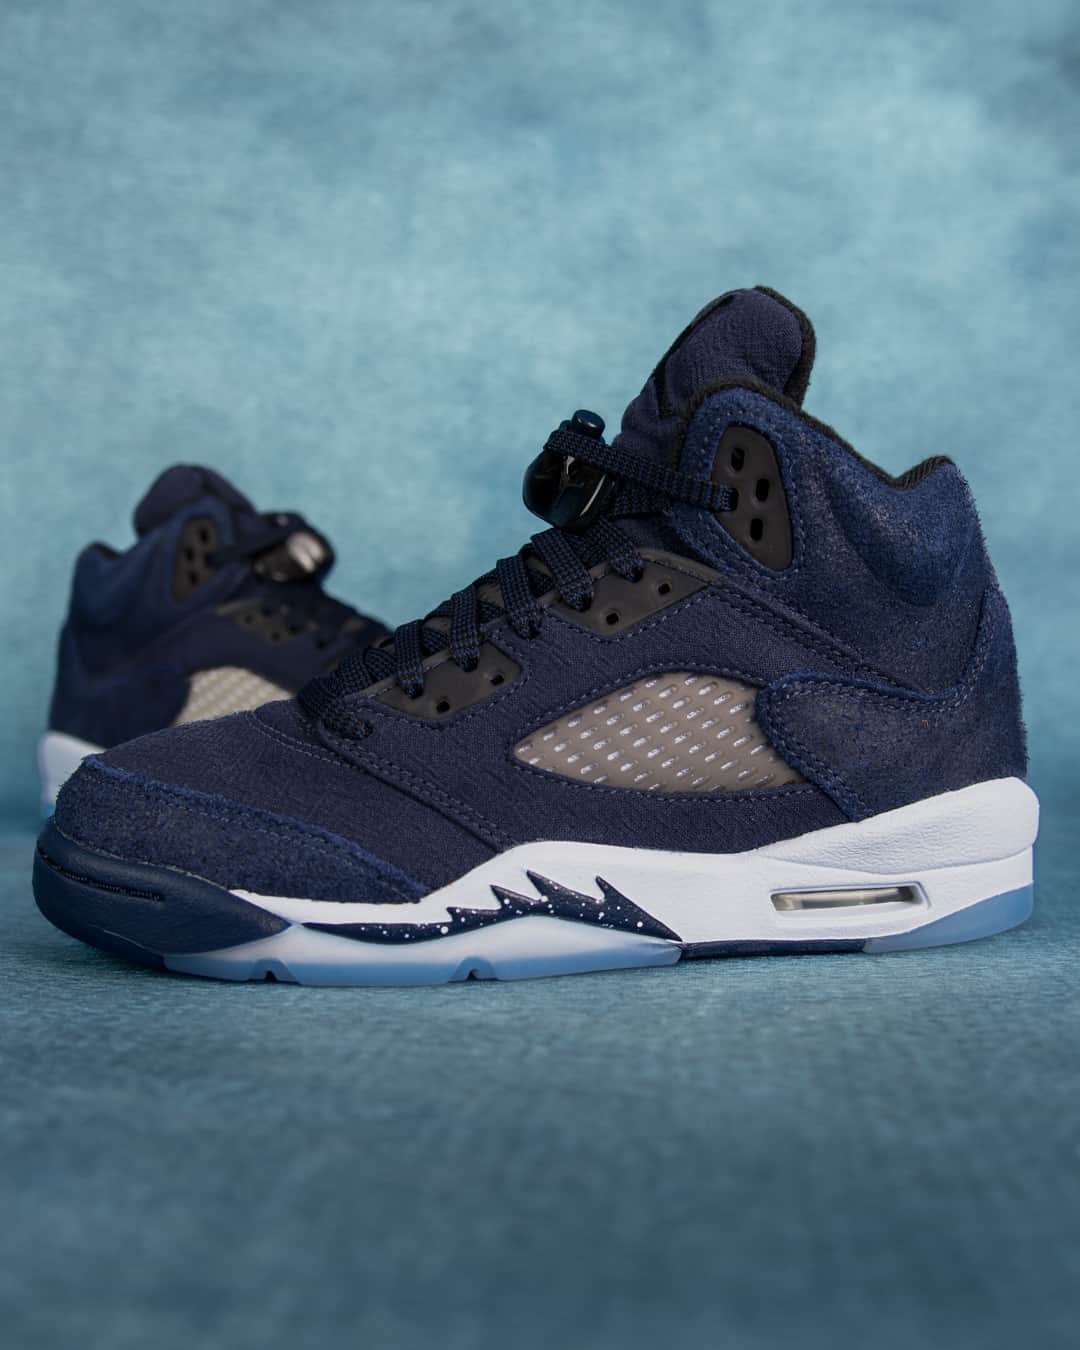 Foot Lockerのインスタグラム：「Blue notes 🔵   The Jordan Retro 5 SE 'Navy' launches 11/10 in men's & kids sizing online.  Reserve your pair now in the Foot Locker app.」